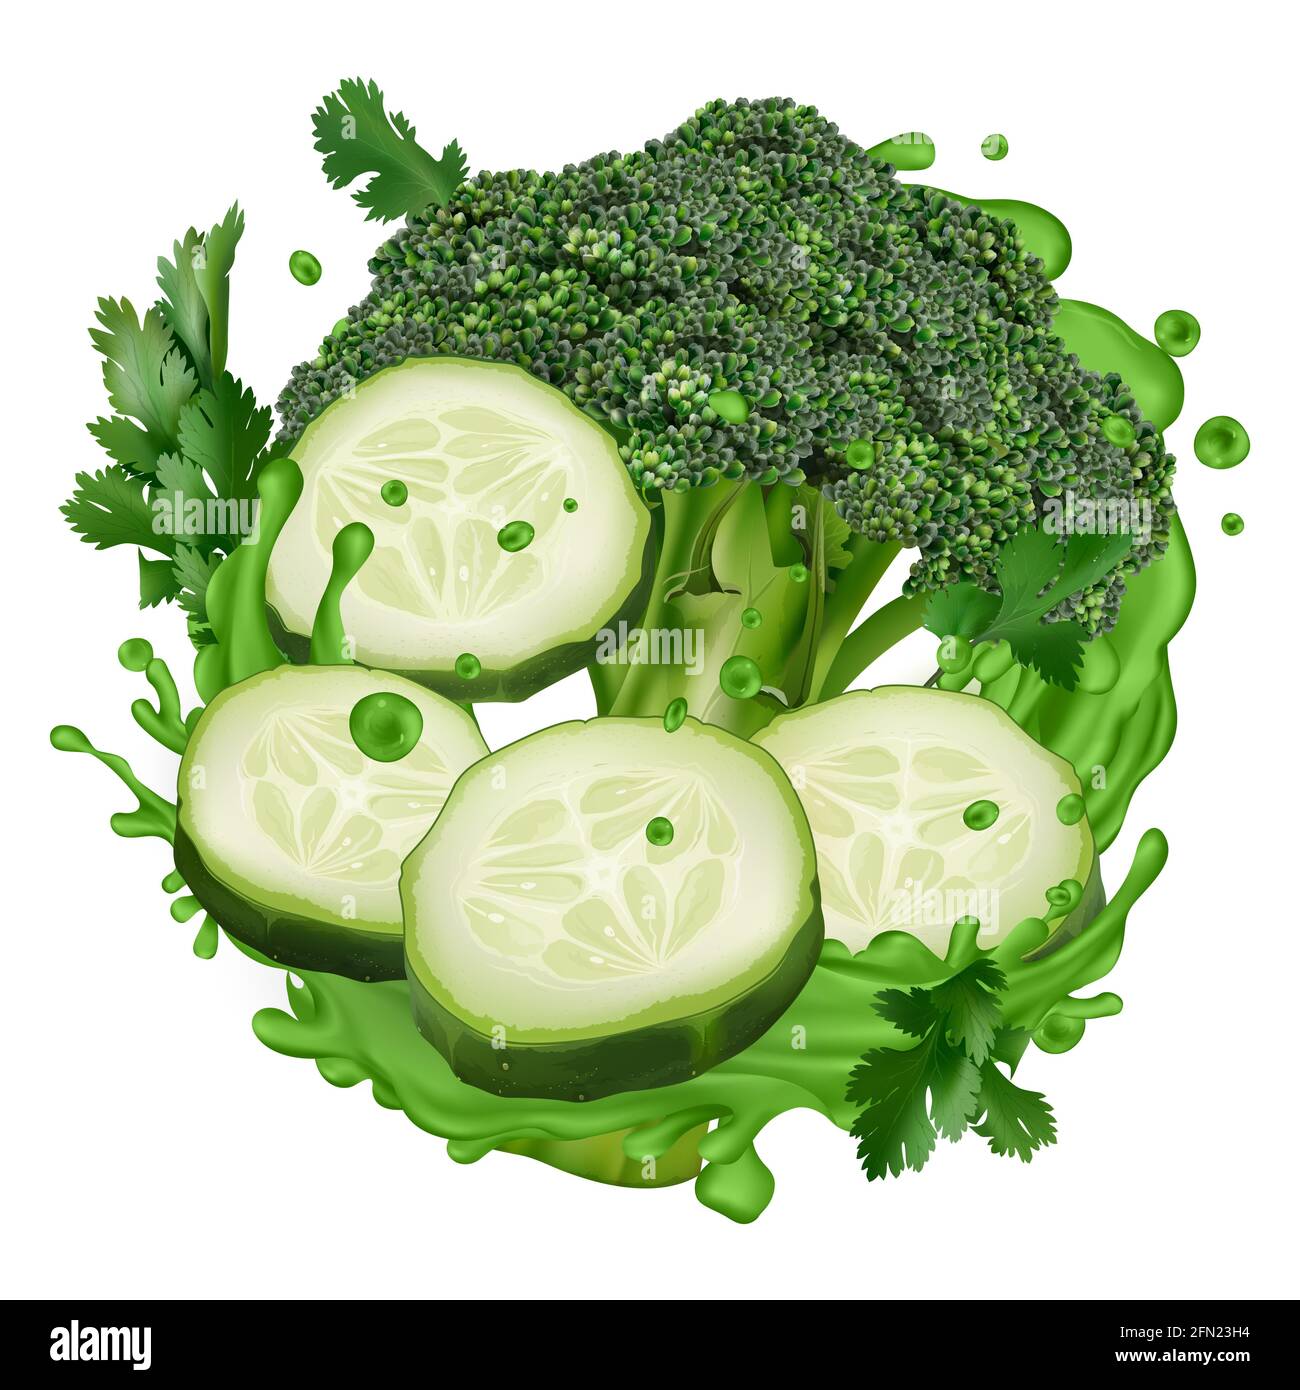 Green juice splash with broccoli and cucumber slices Stock Photo